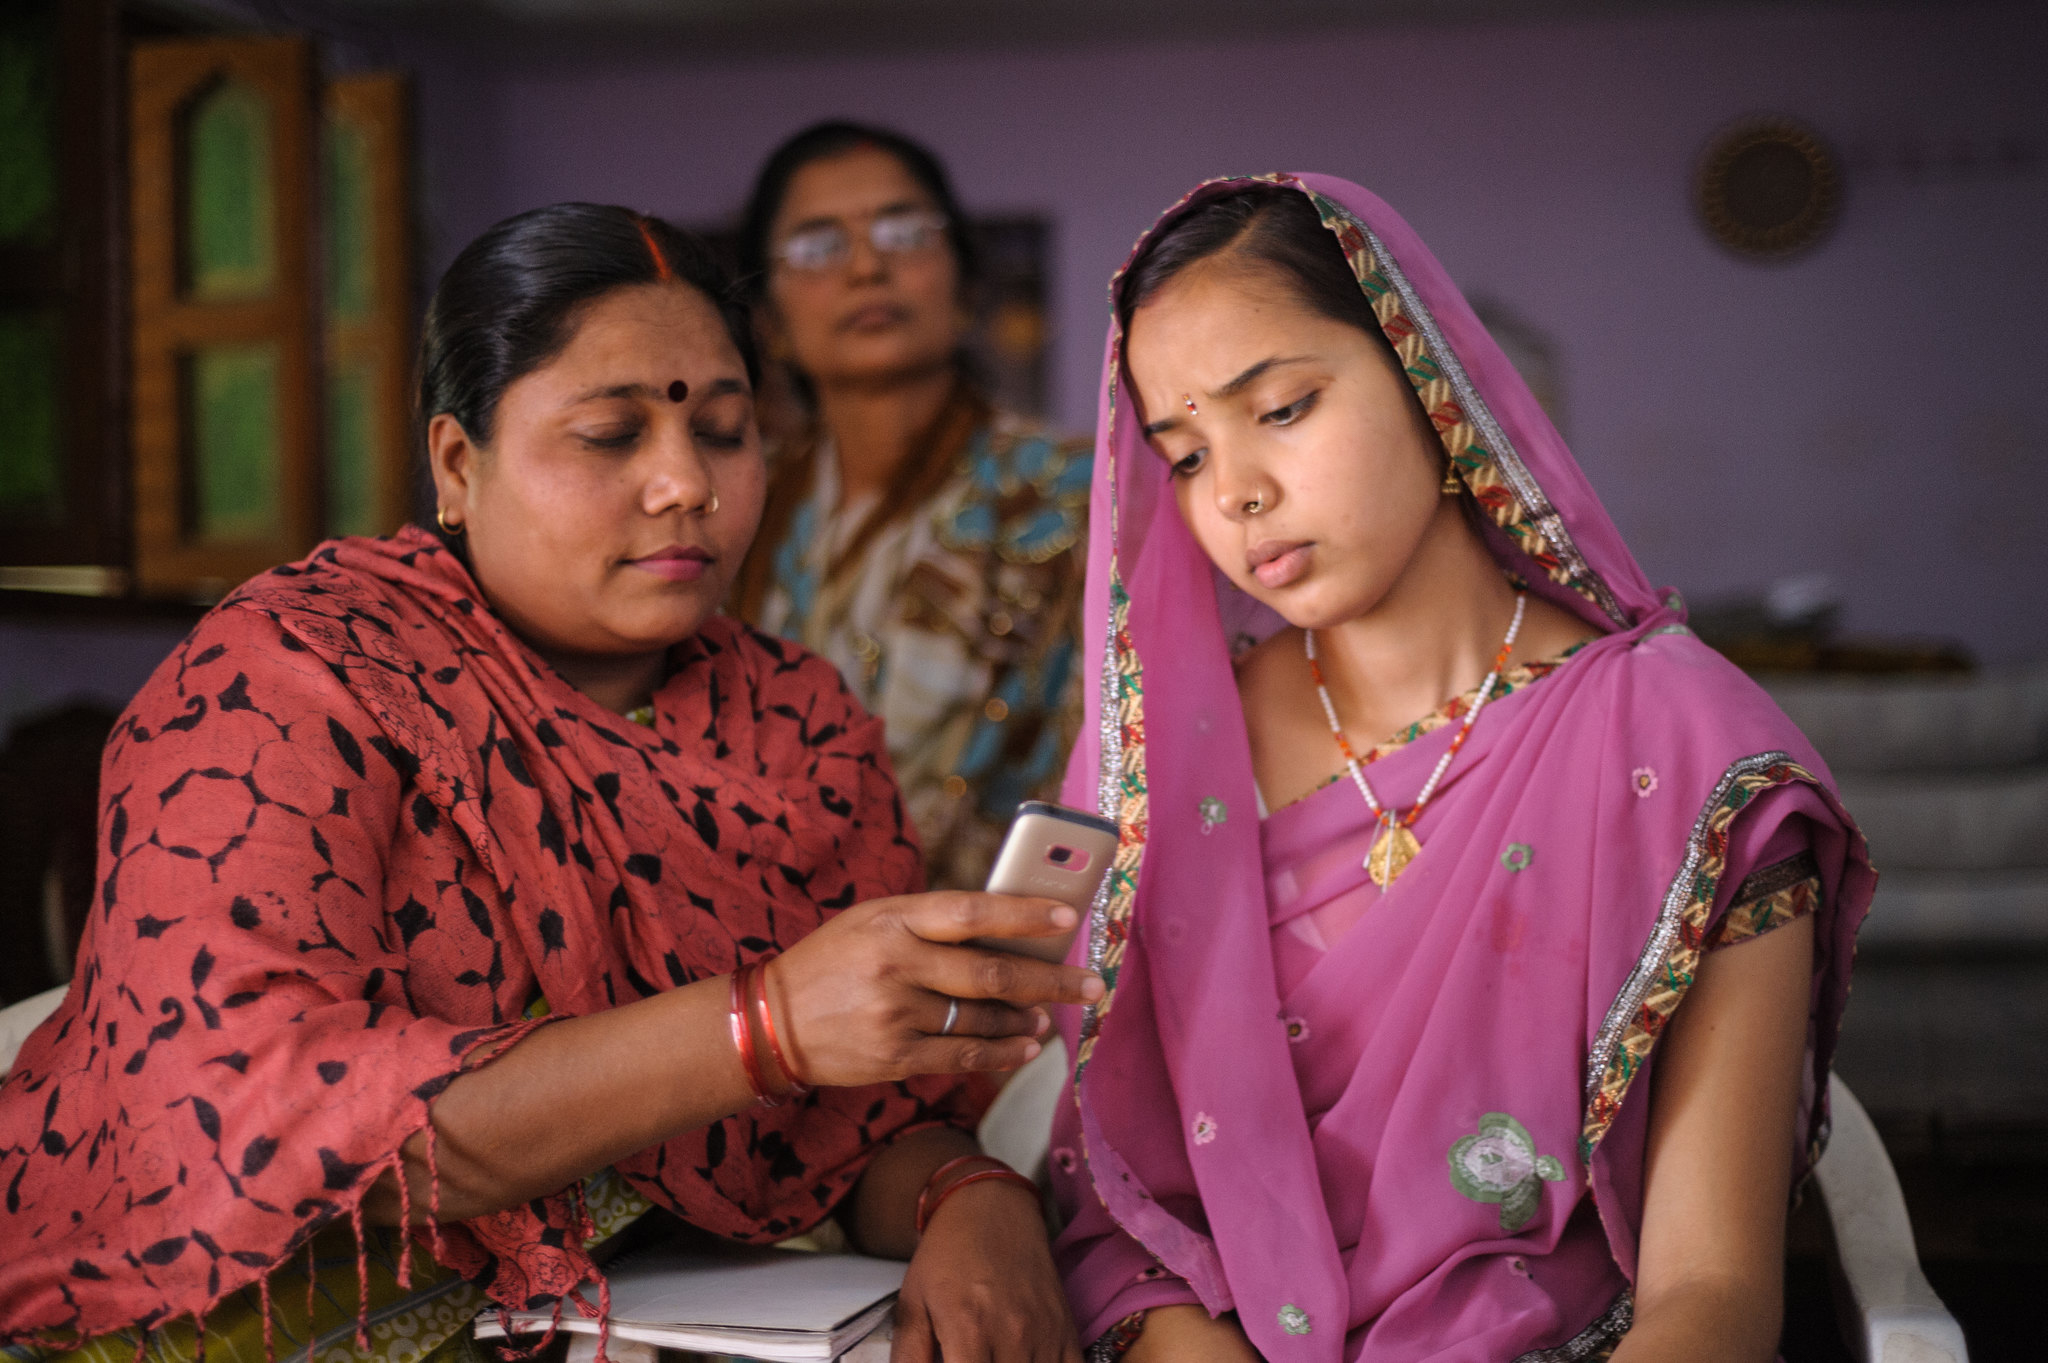 Image provided by the mobile tool Dimagi shows two women looking at a cellular photo.